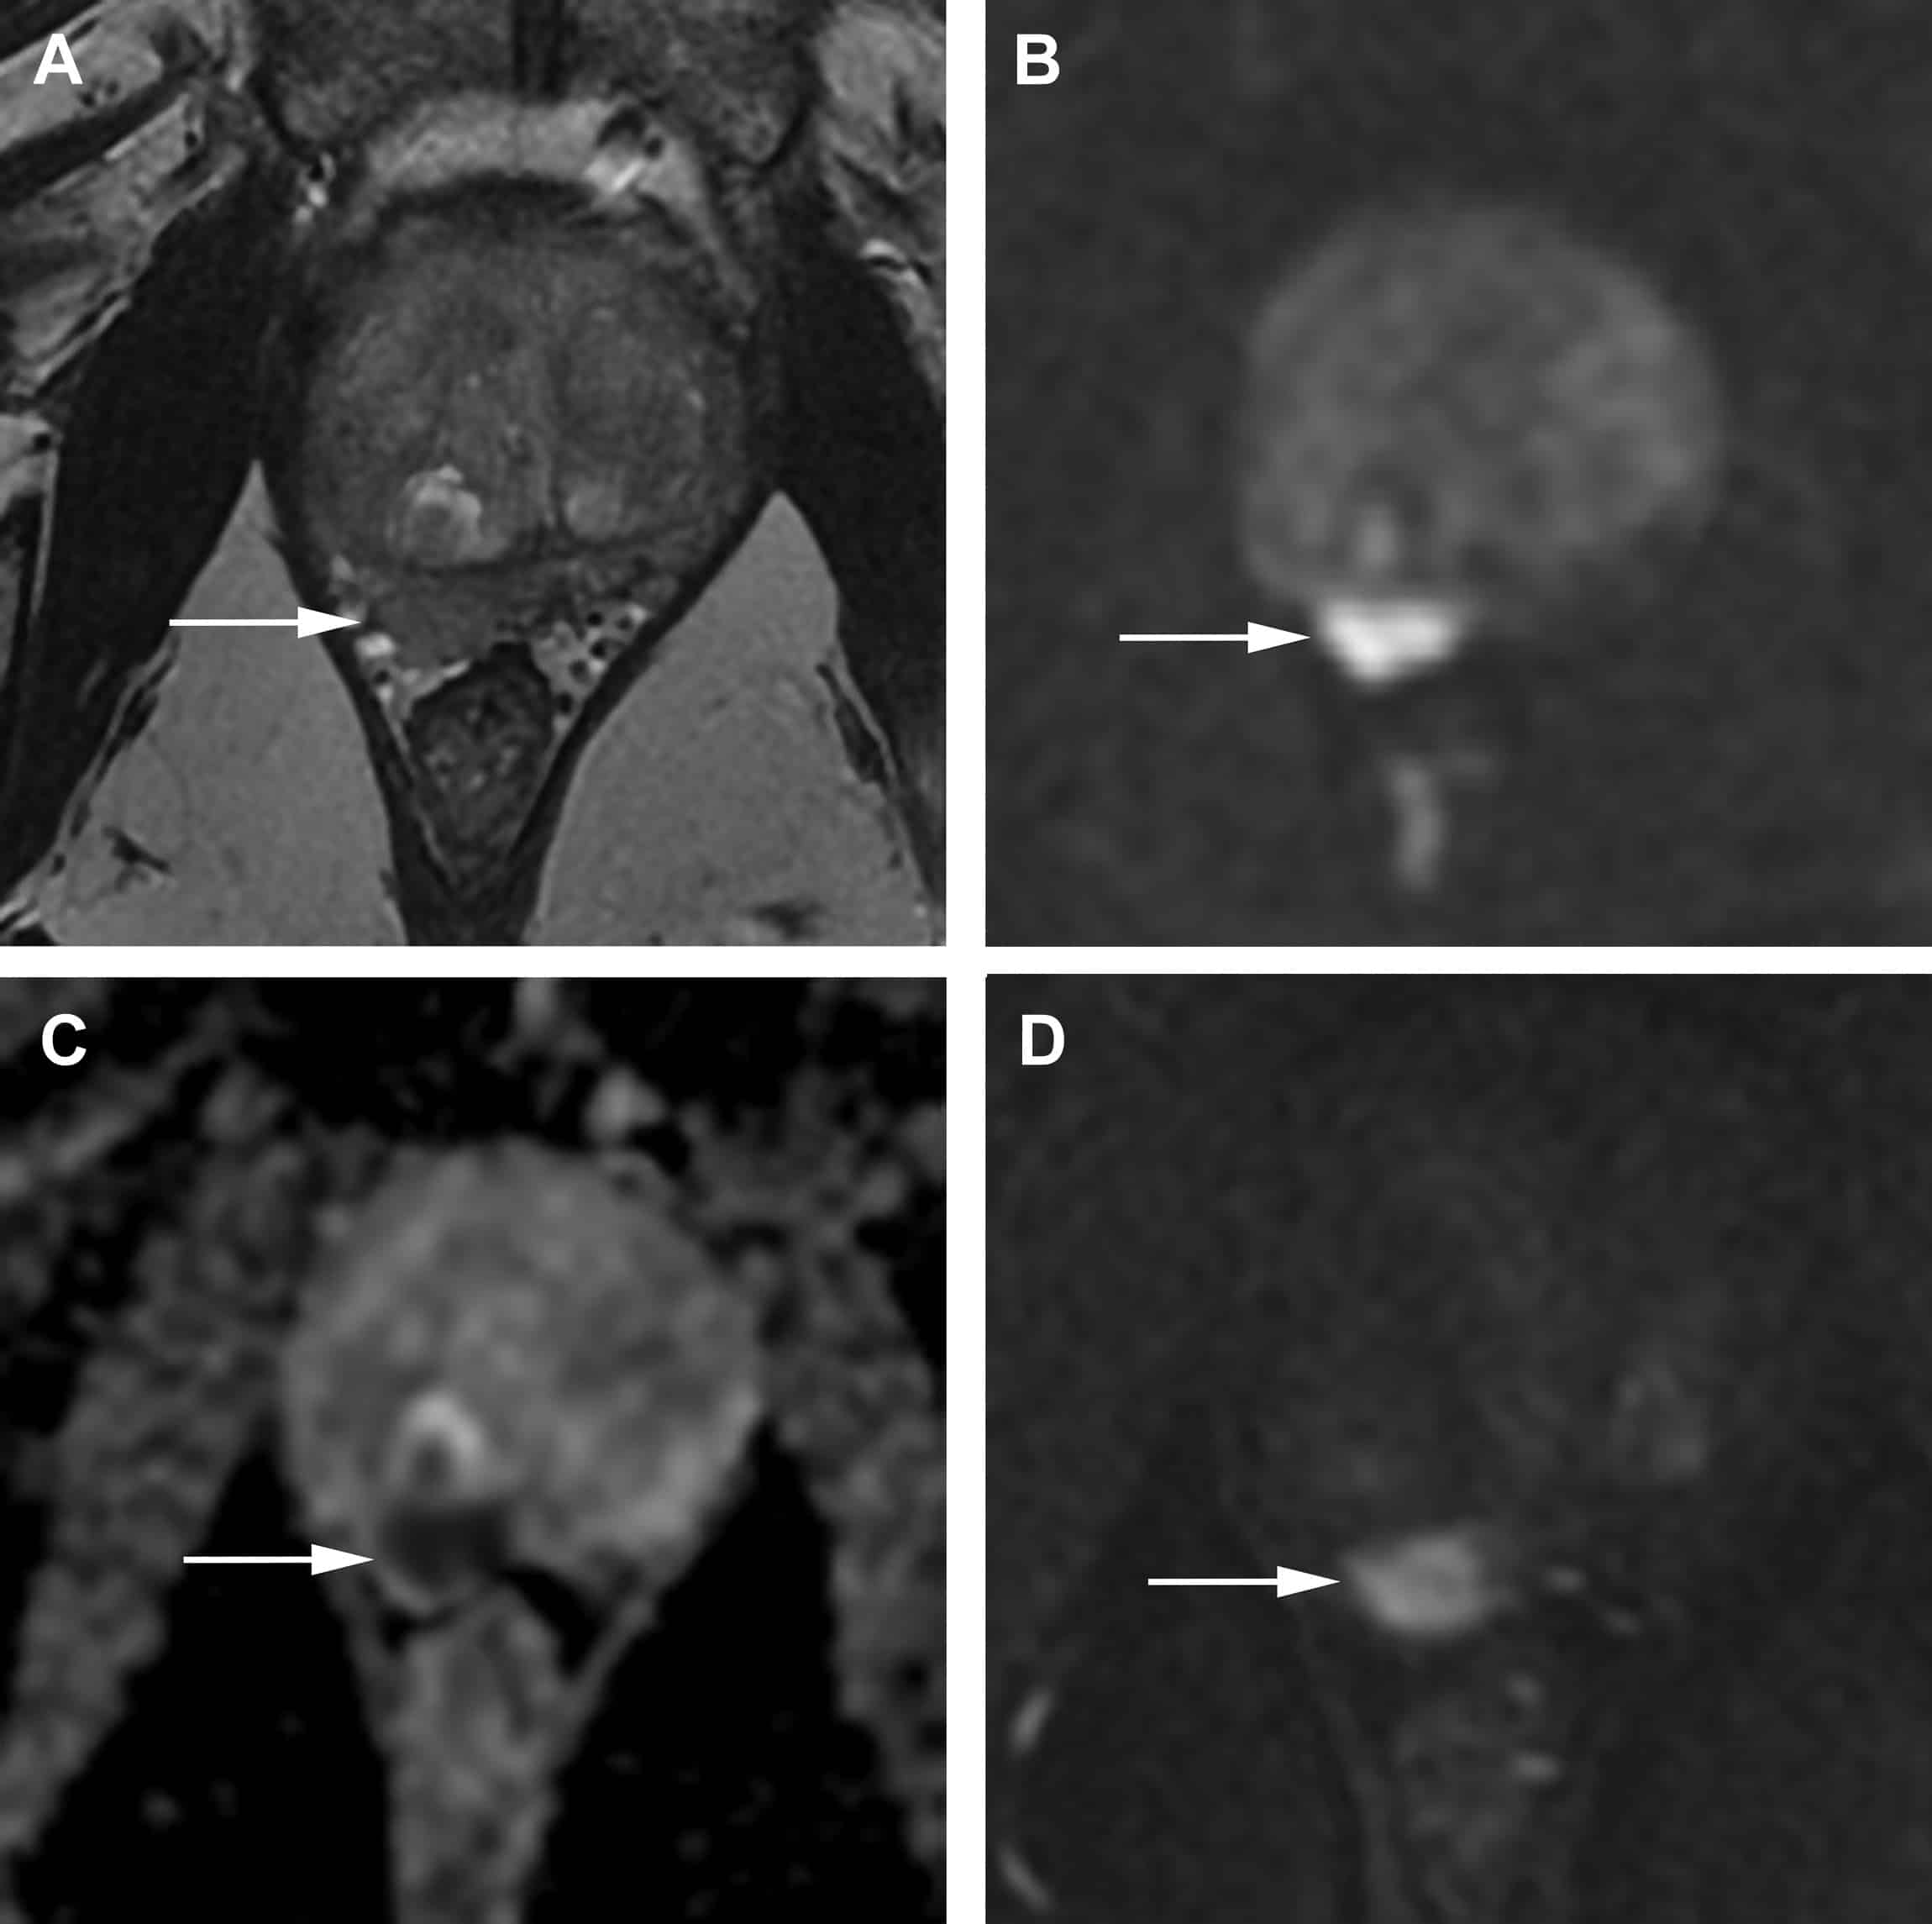 Multiparametric MR imaging of the Prostate